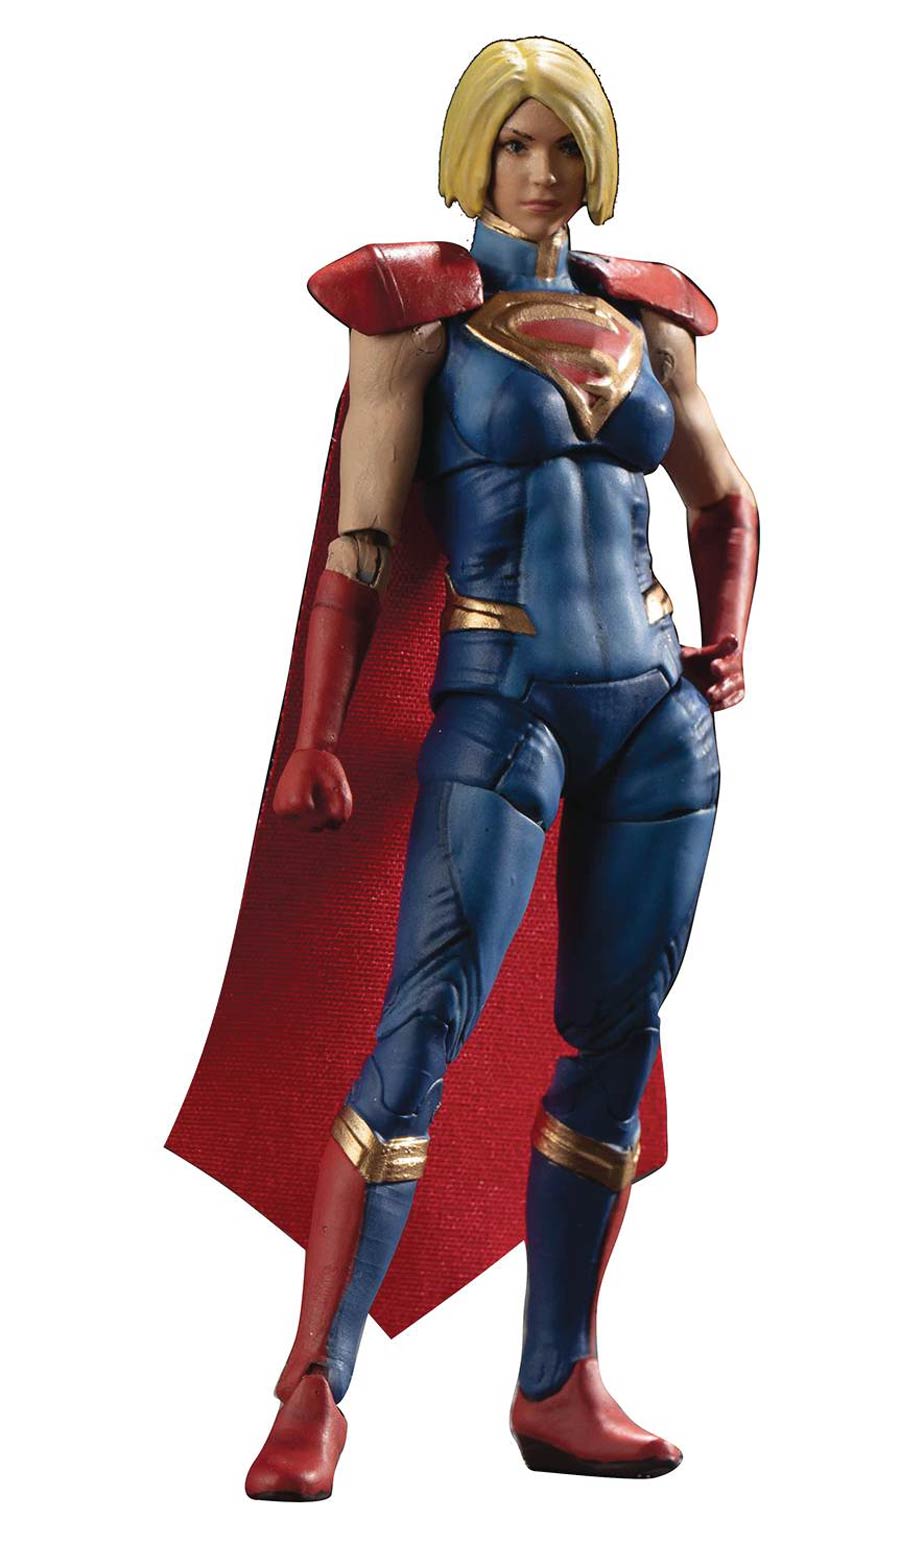 Injustice 2 Supergirl Previews Exclusive 1/18 Scale Action Figure